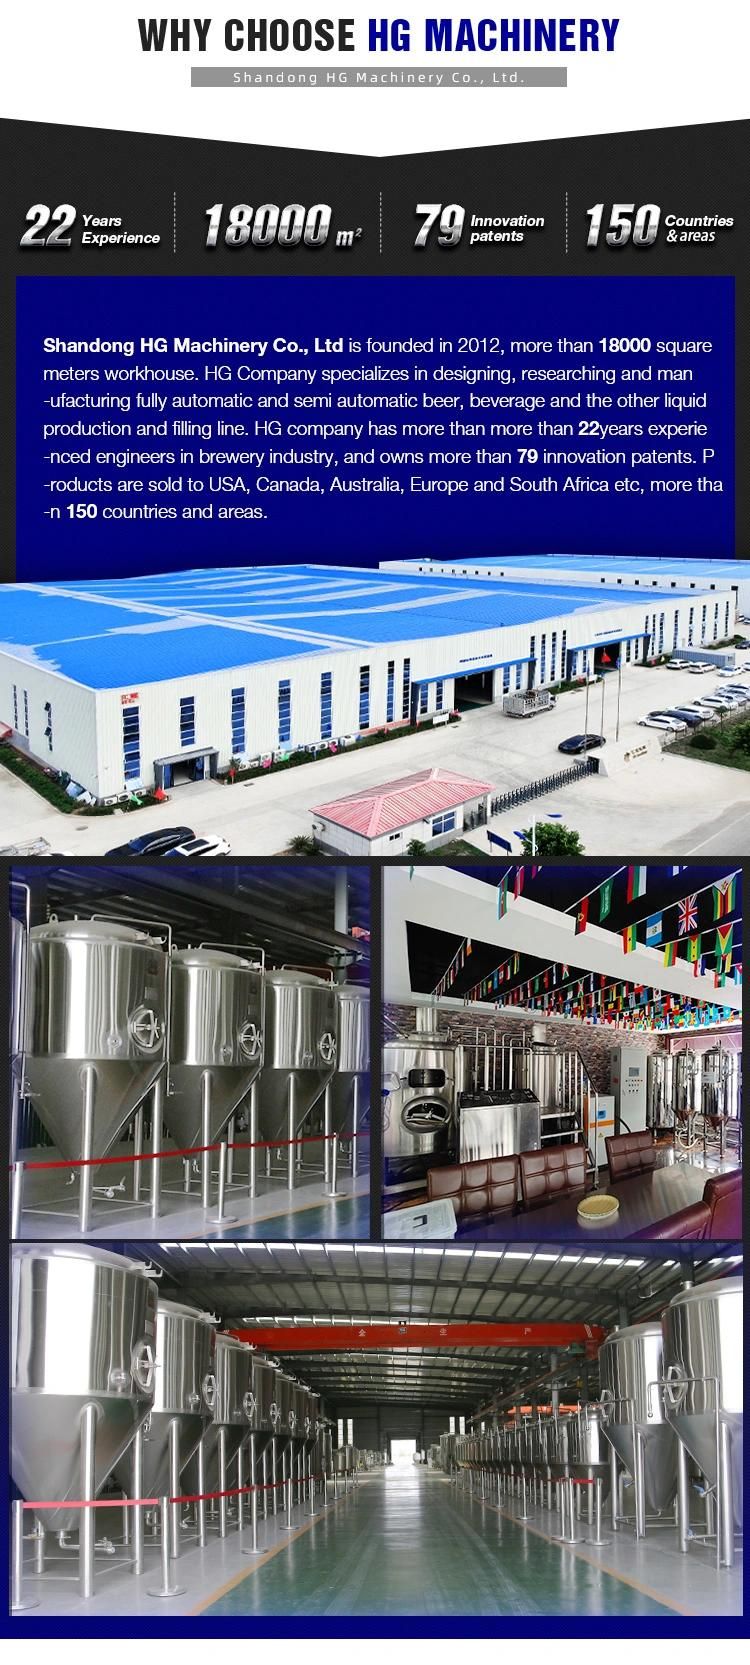 2000L Industrial Stainless Steel Beer Wine Fermentation Tank with Cooling Jacket